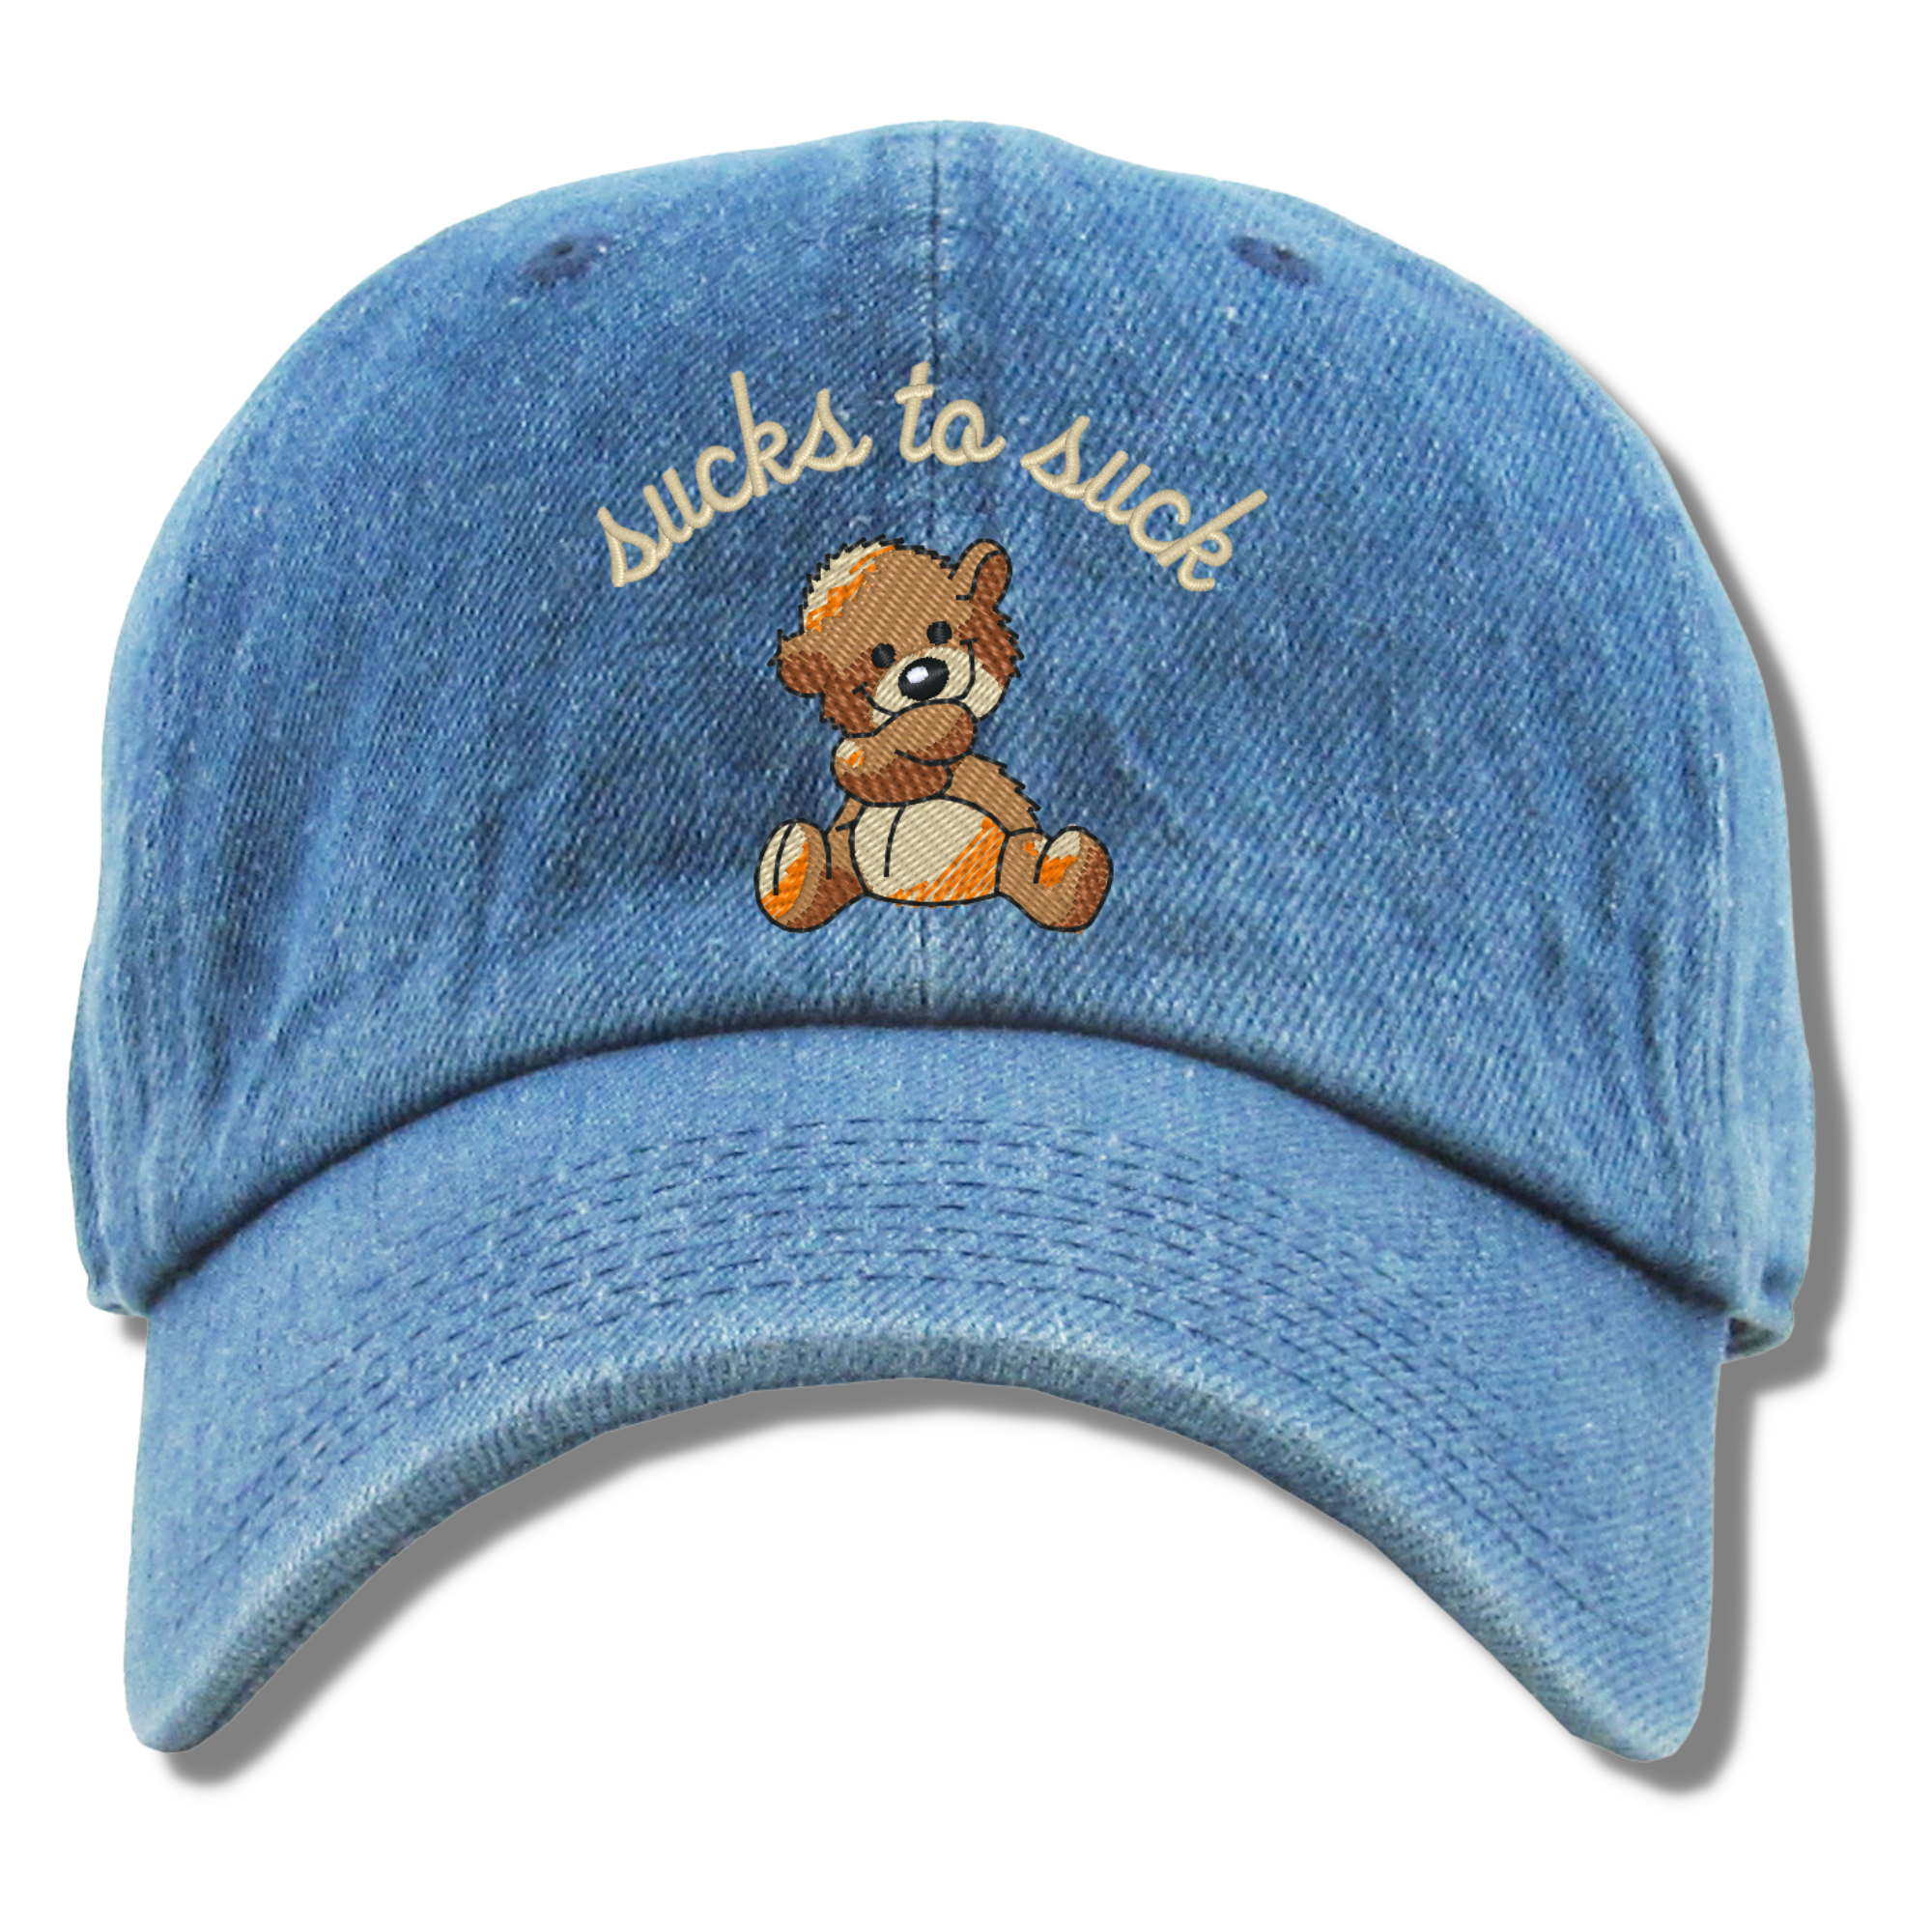 Sucks to Suck Embroidered Dad Hat, One Size Fits All